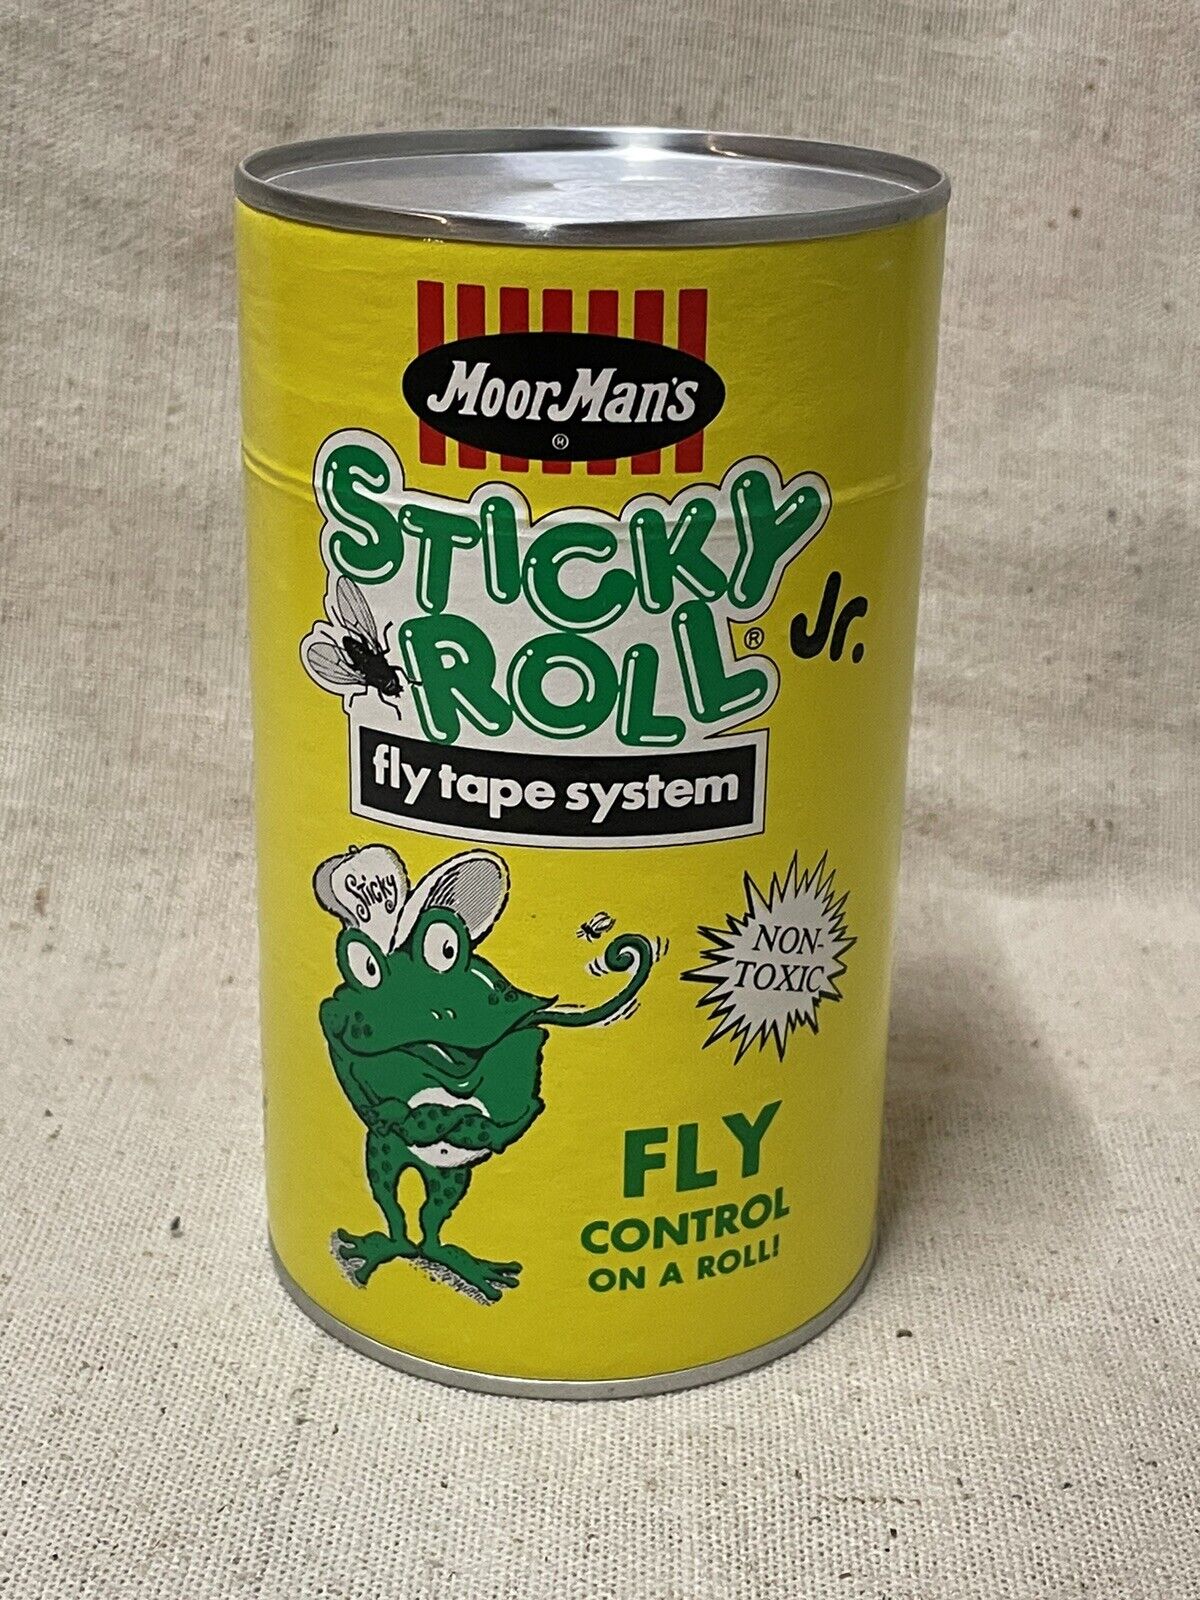 12 NOS Moormans Sticky Roll Jr. Fly Tape System. Very Rare Quincy, IL